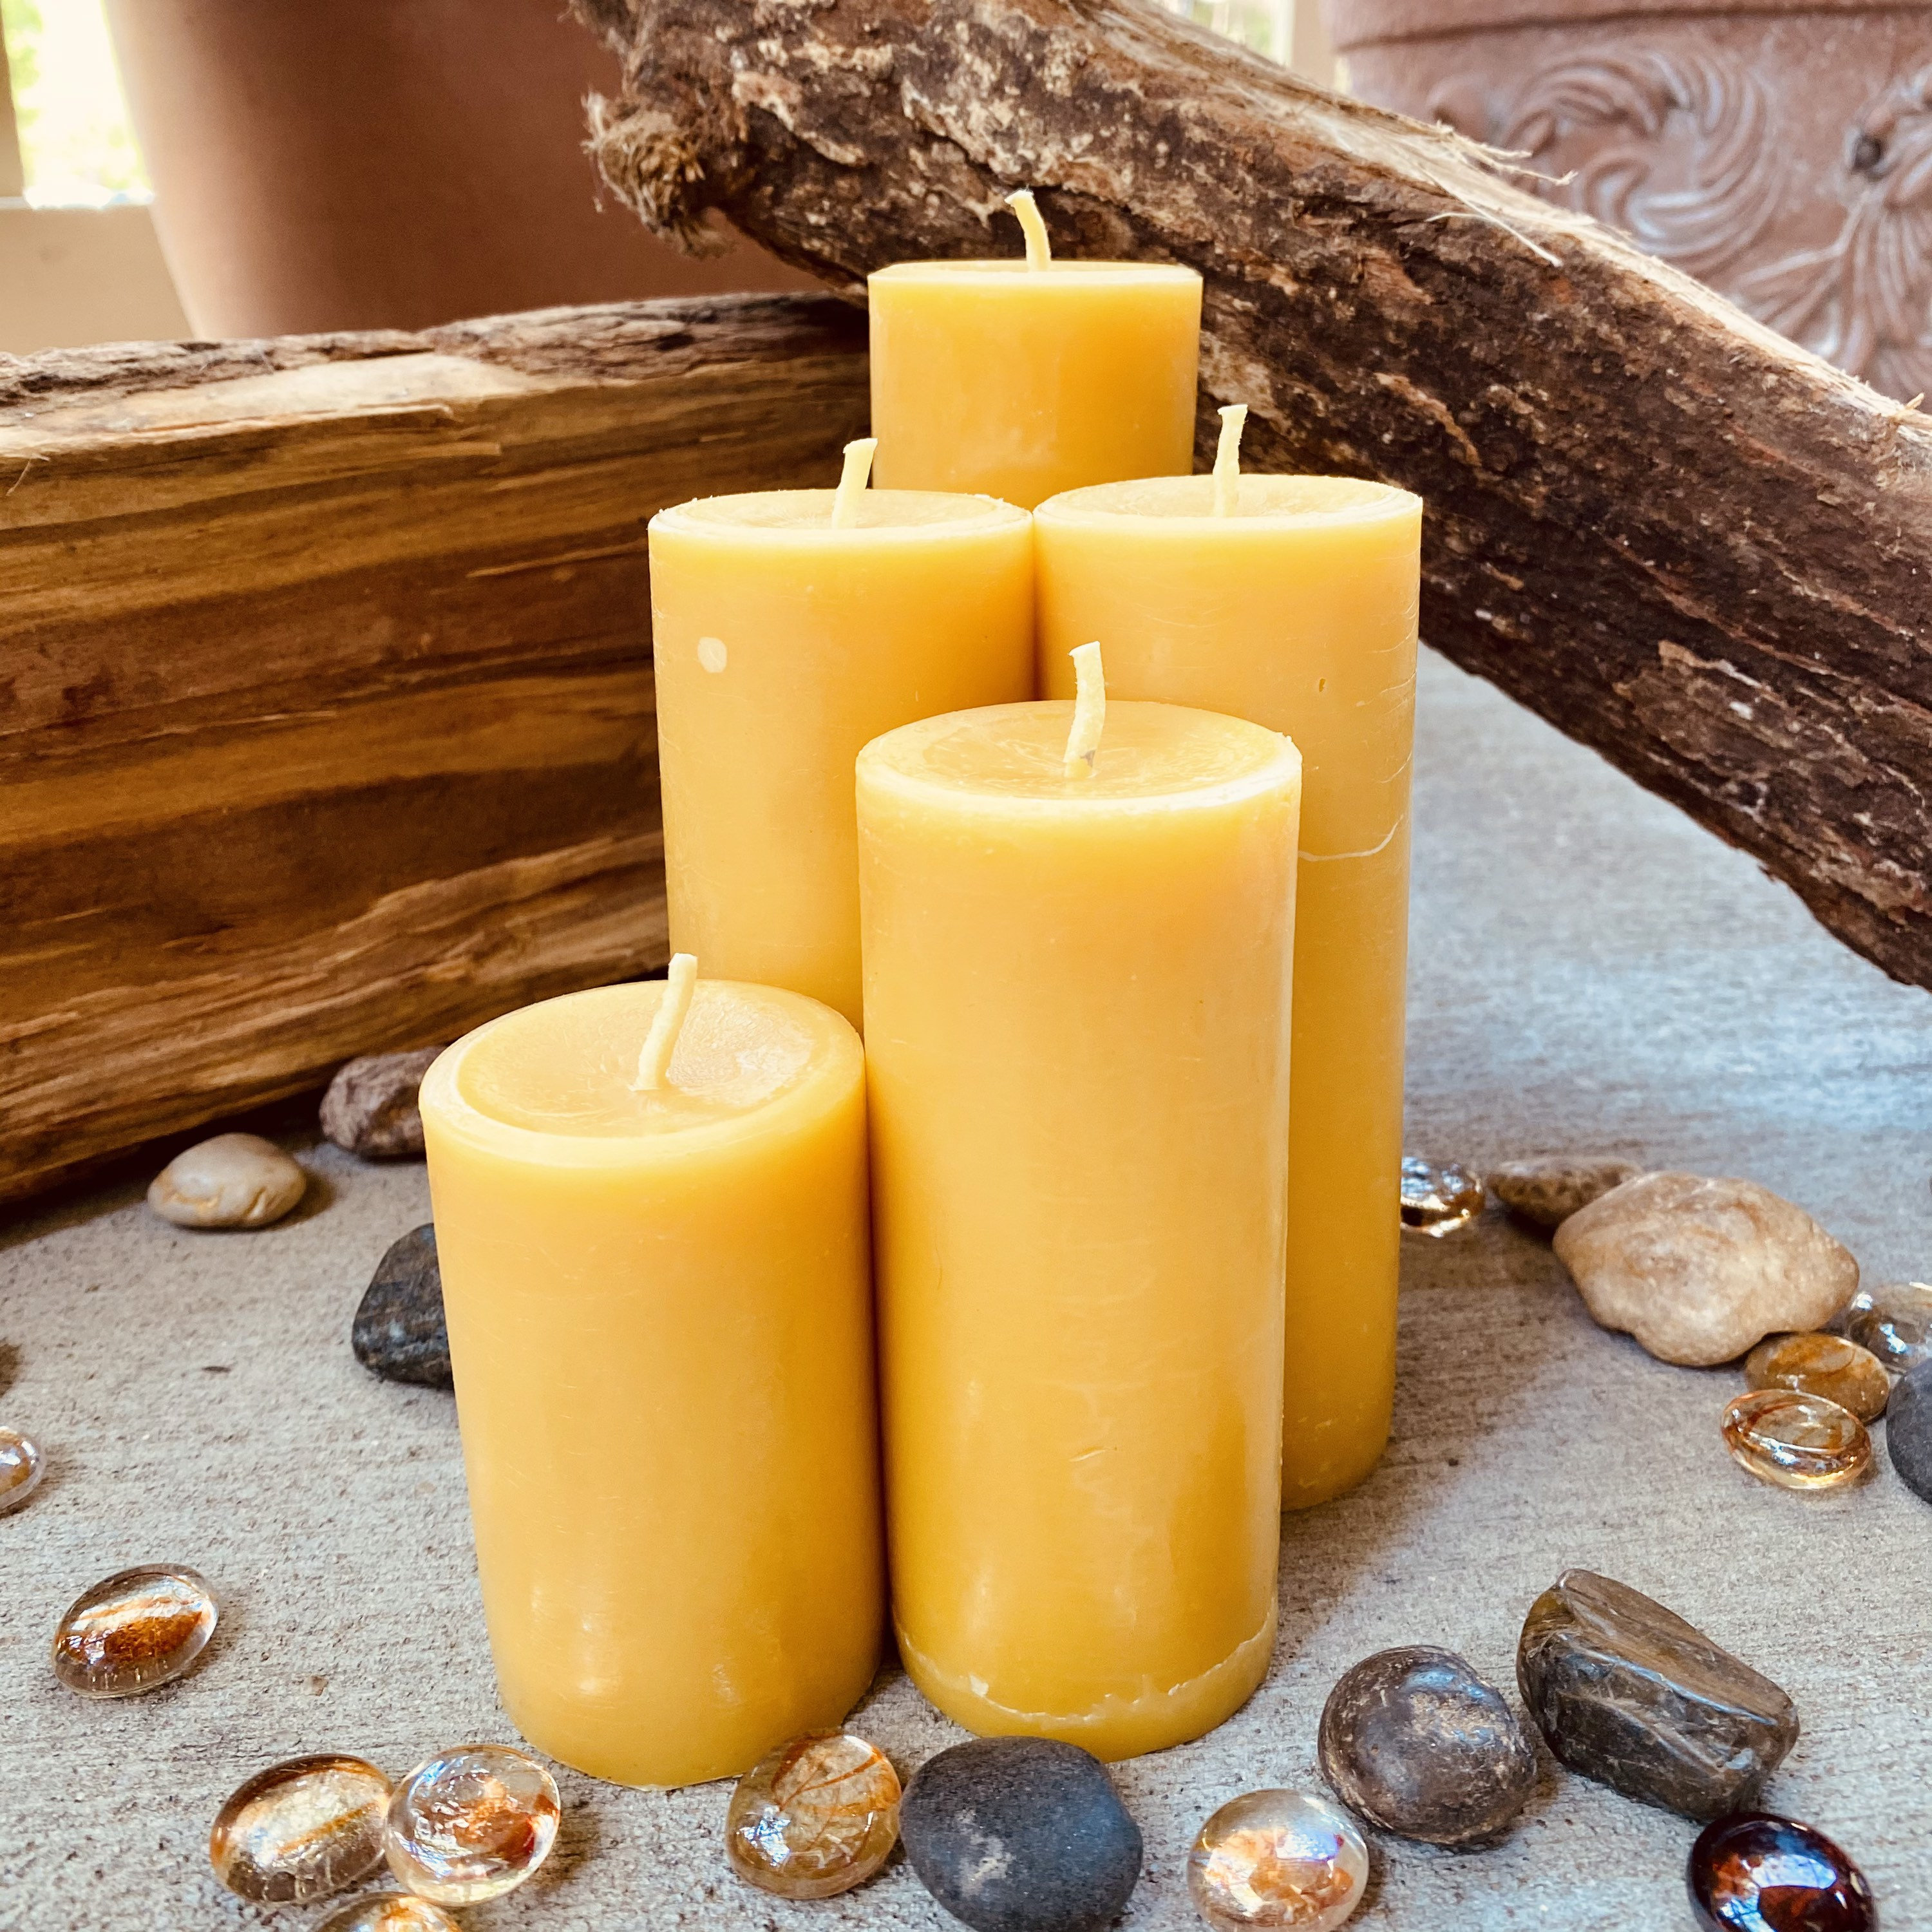 Rustic 100% Pure Beeswax Green Candles/tall Natural Beeswax Pillar  Candles/handmade Bees Wax Natural Candles 